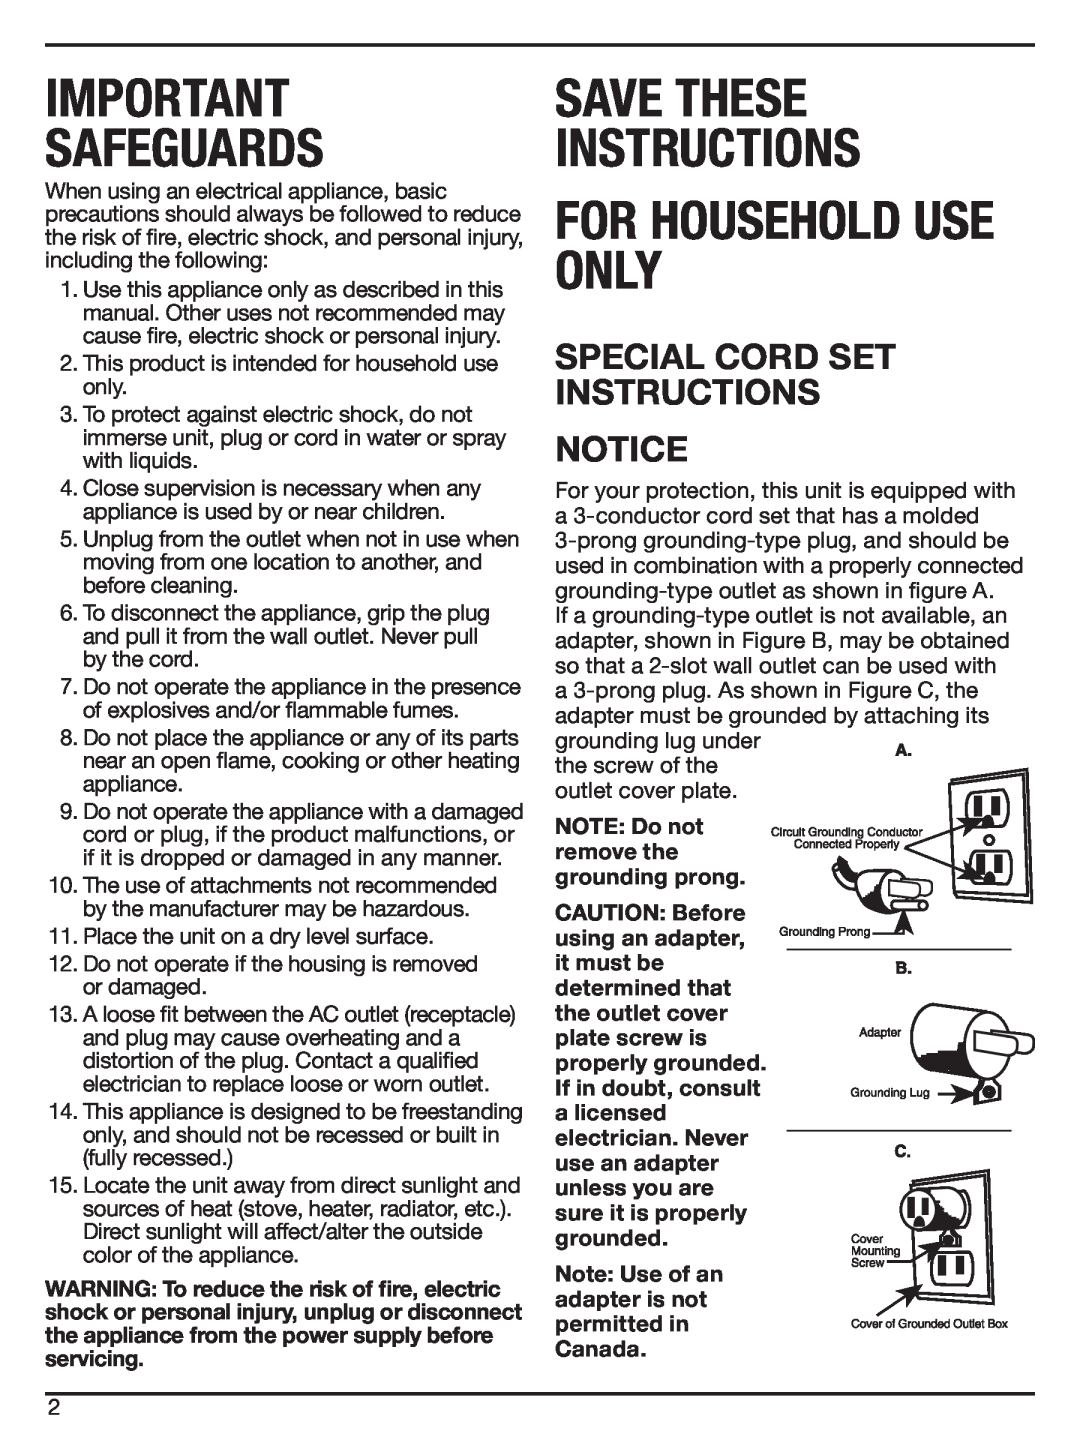 Cuisinart CWC-1600 manual Special Cord Set Instructions, Safeguards, Save These Instructions, For Household Use Only 